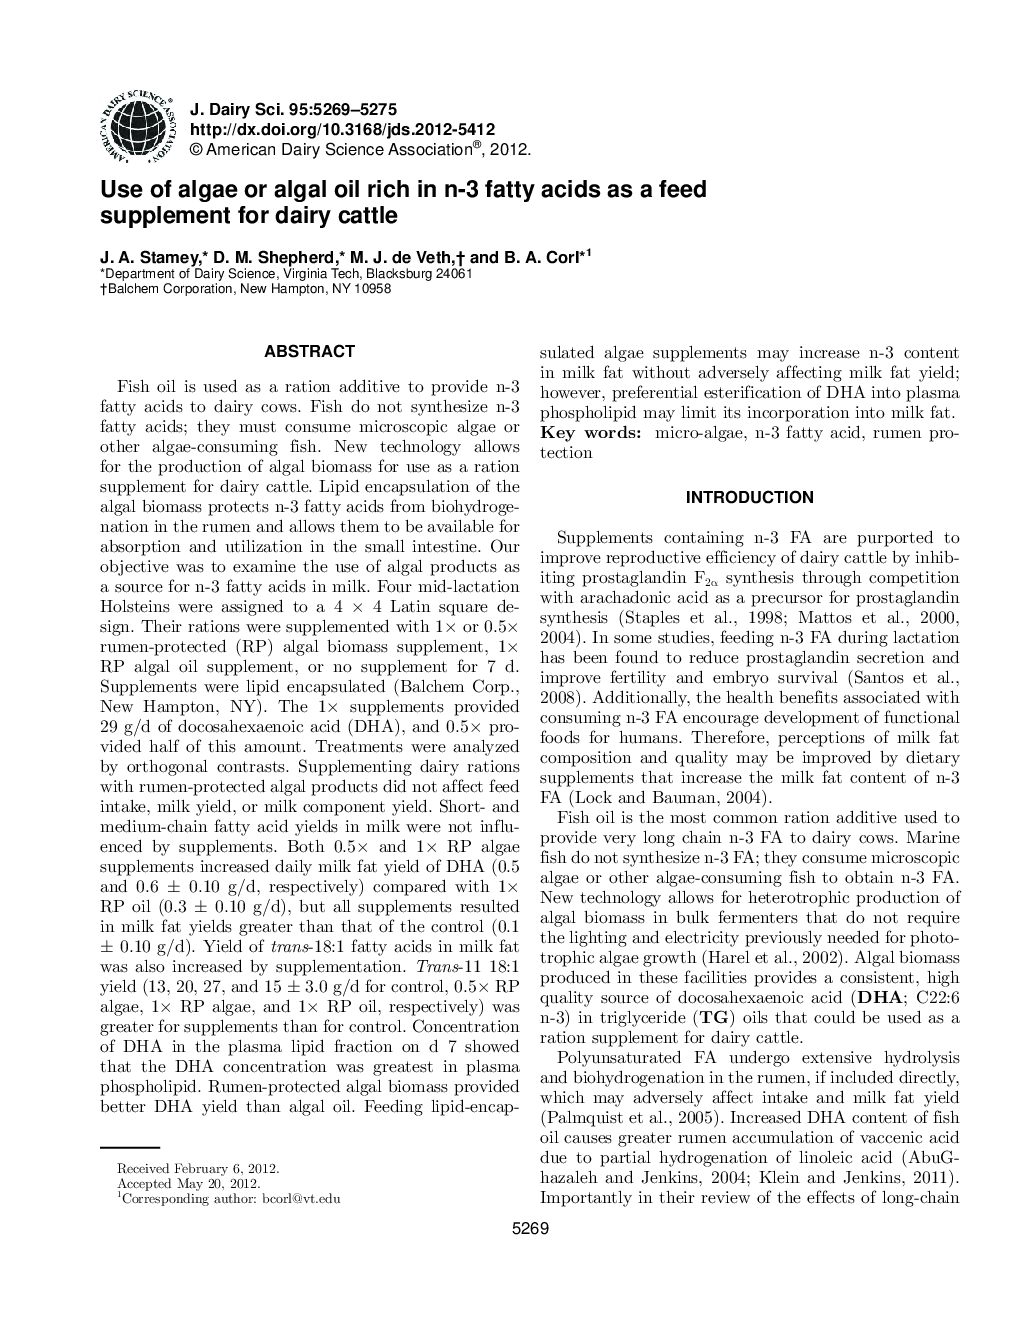 Use of algae or algal oil rich in n-3 fatty acids as a feed supplement for dairy cattle